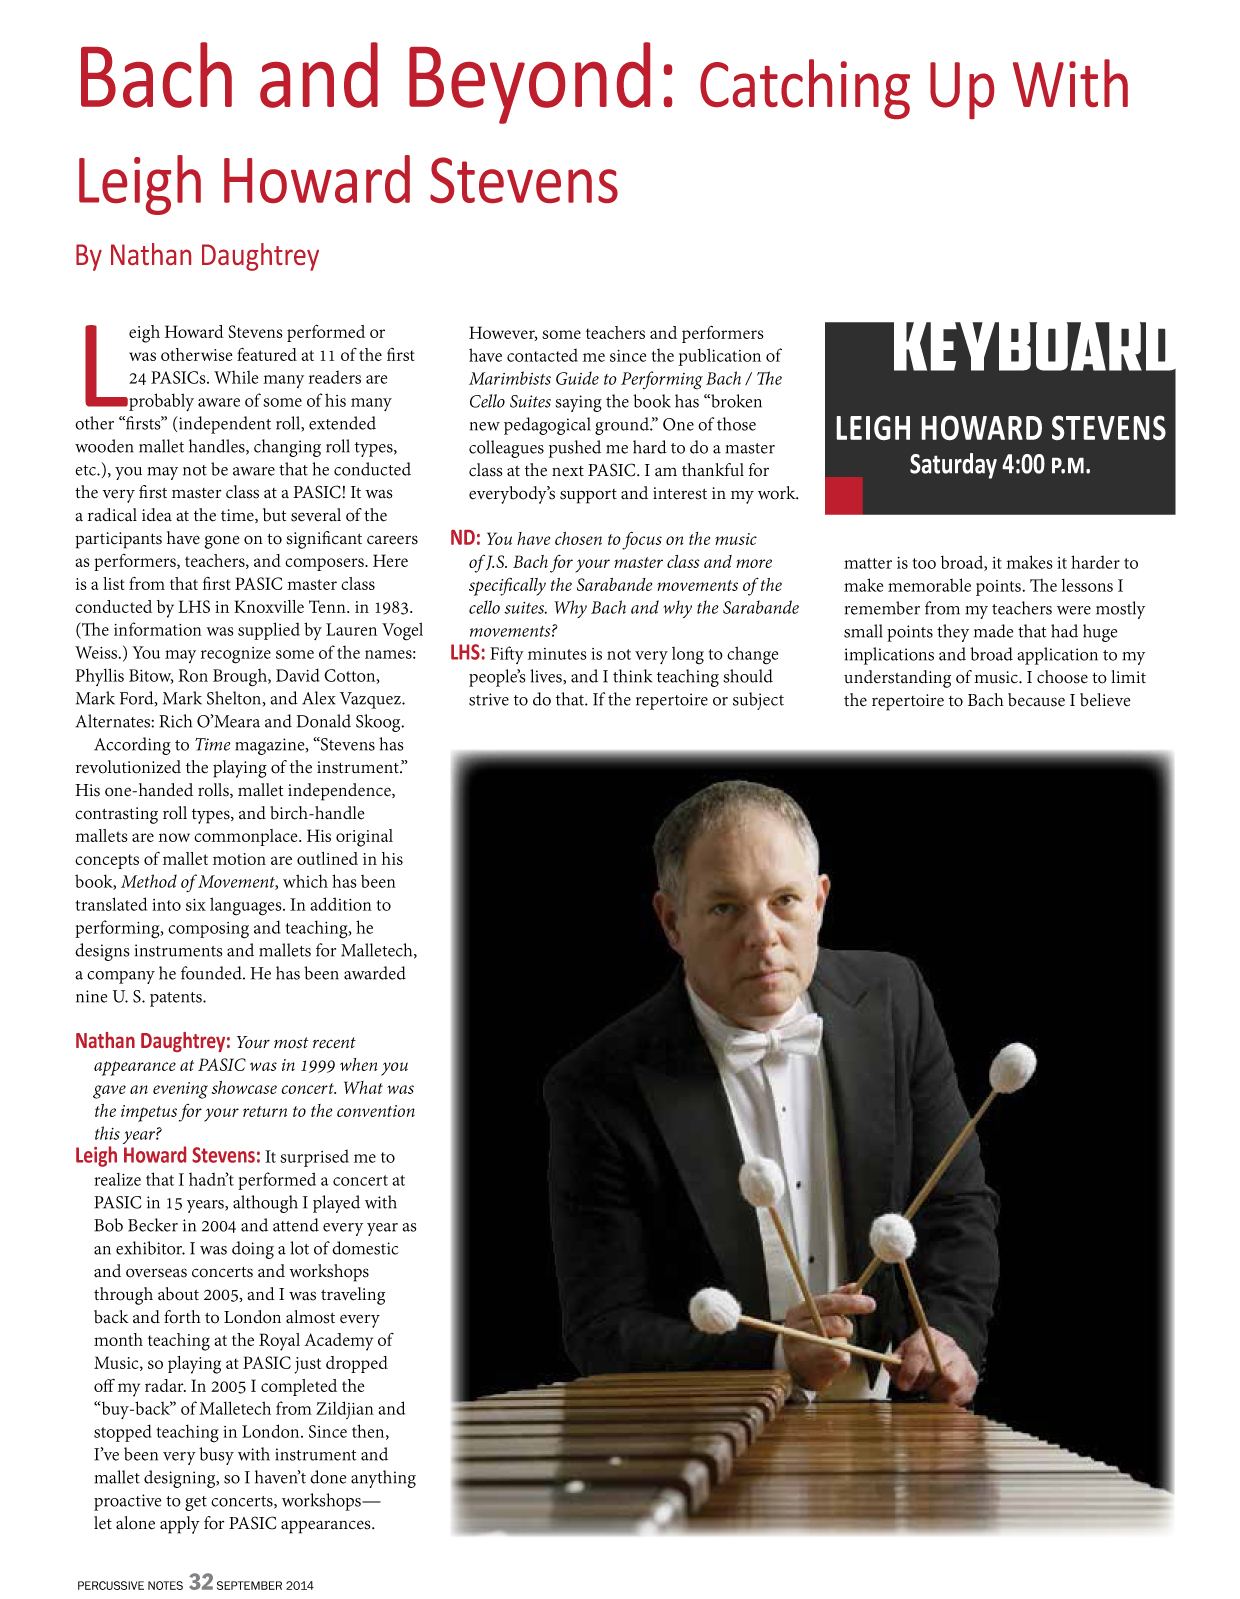 Bach and Beyond: Catching up with Leigh Howard Stevens